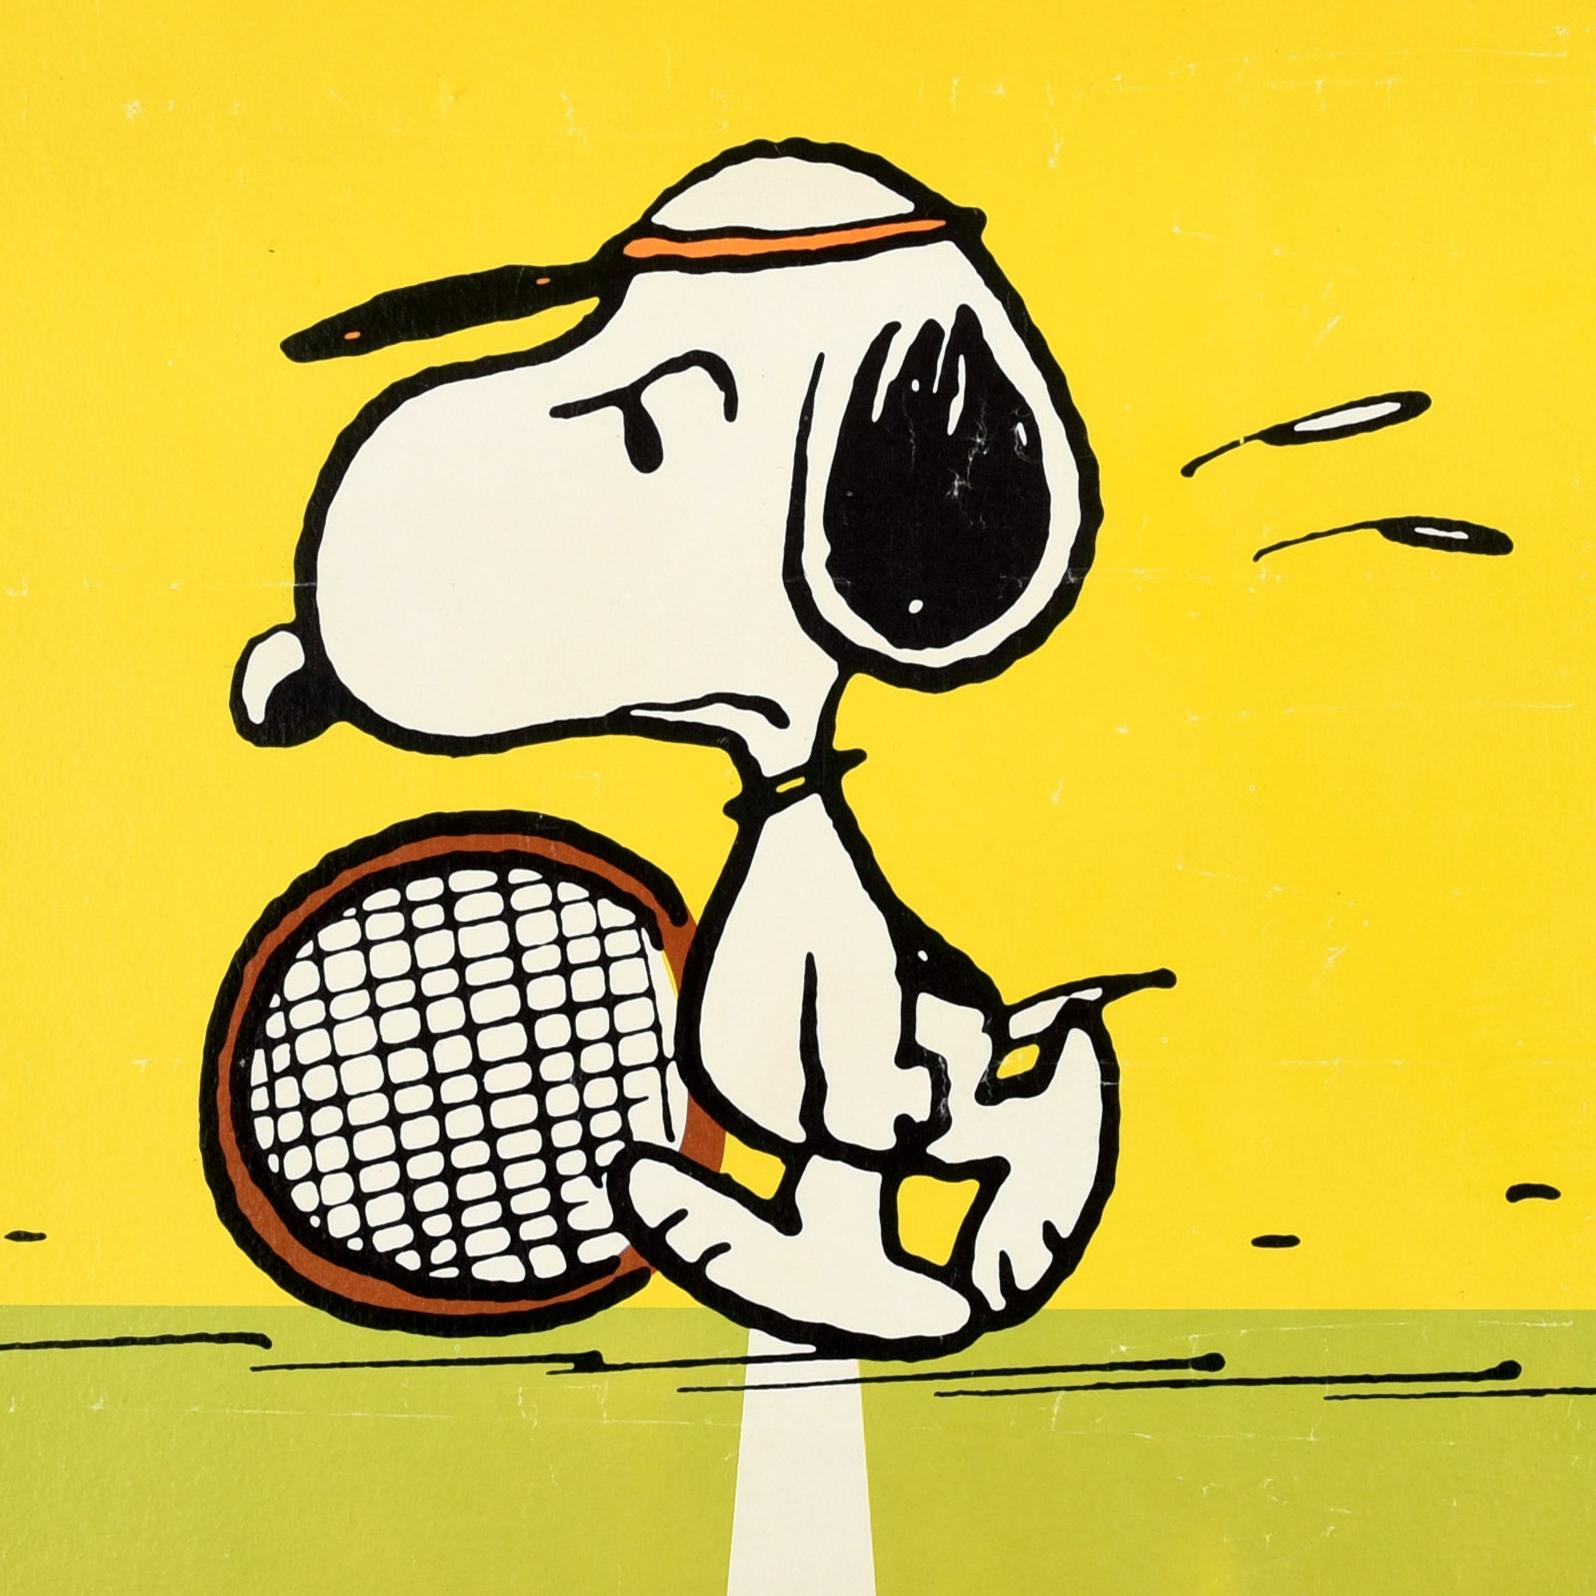 Original vintage poster featuring the iconic comic character Snoopy the Dog by the notable American cartoonist Charles M. Schulz (Charles Monroe Schulz; 1922-2000) - It doesn't matter if you win or lose... until you lose! Fun design showing Snoopy